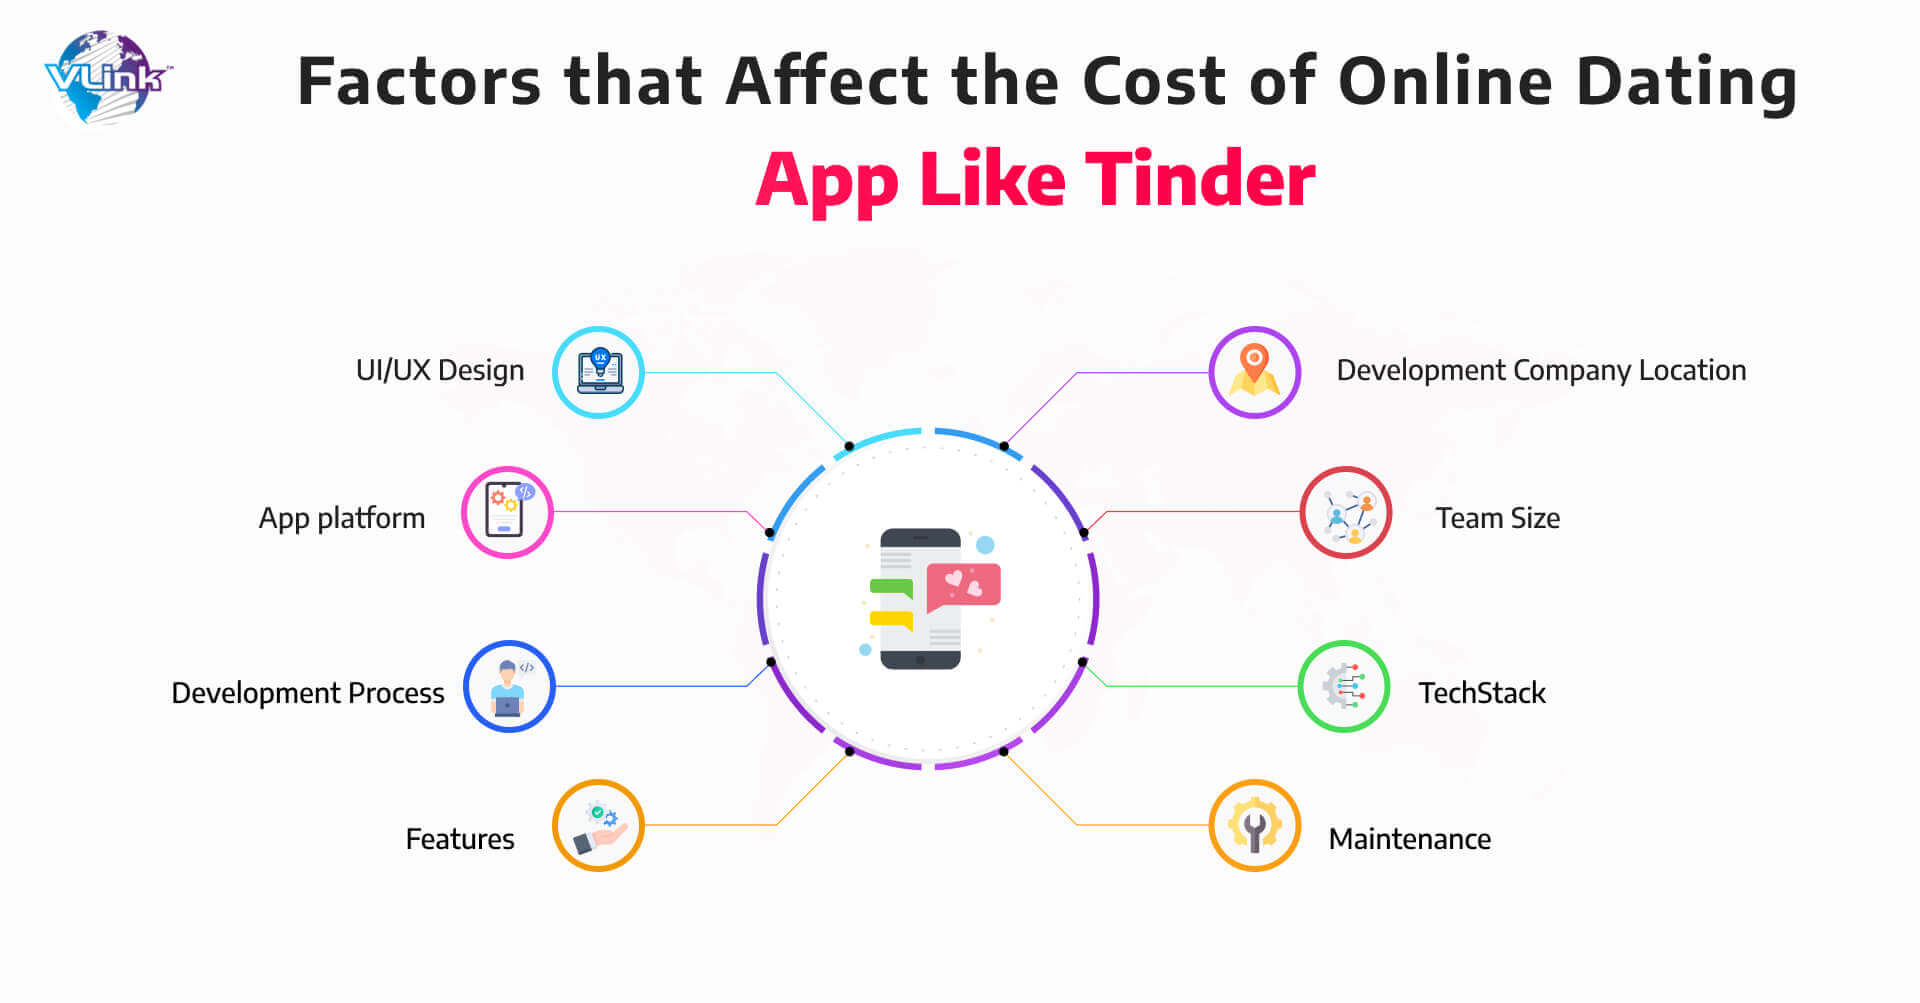 Factors That Affect Tinder-Like Dating App Development Cost